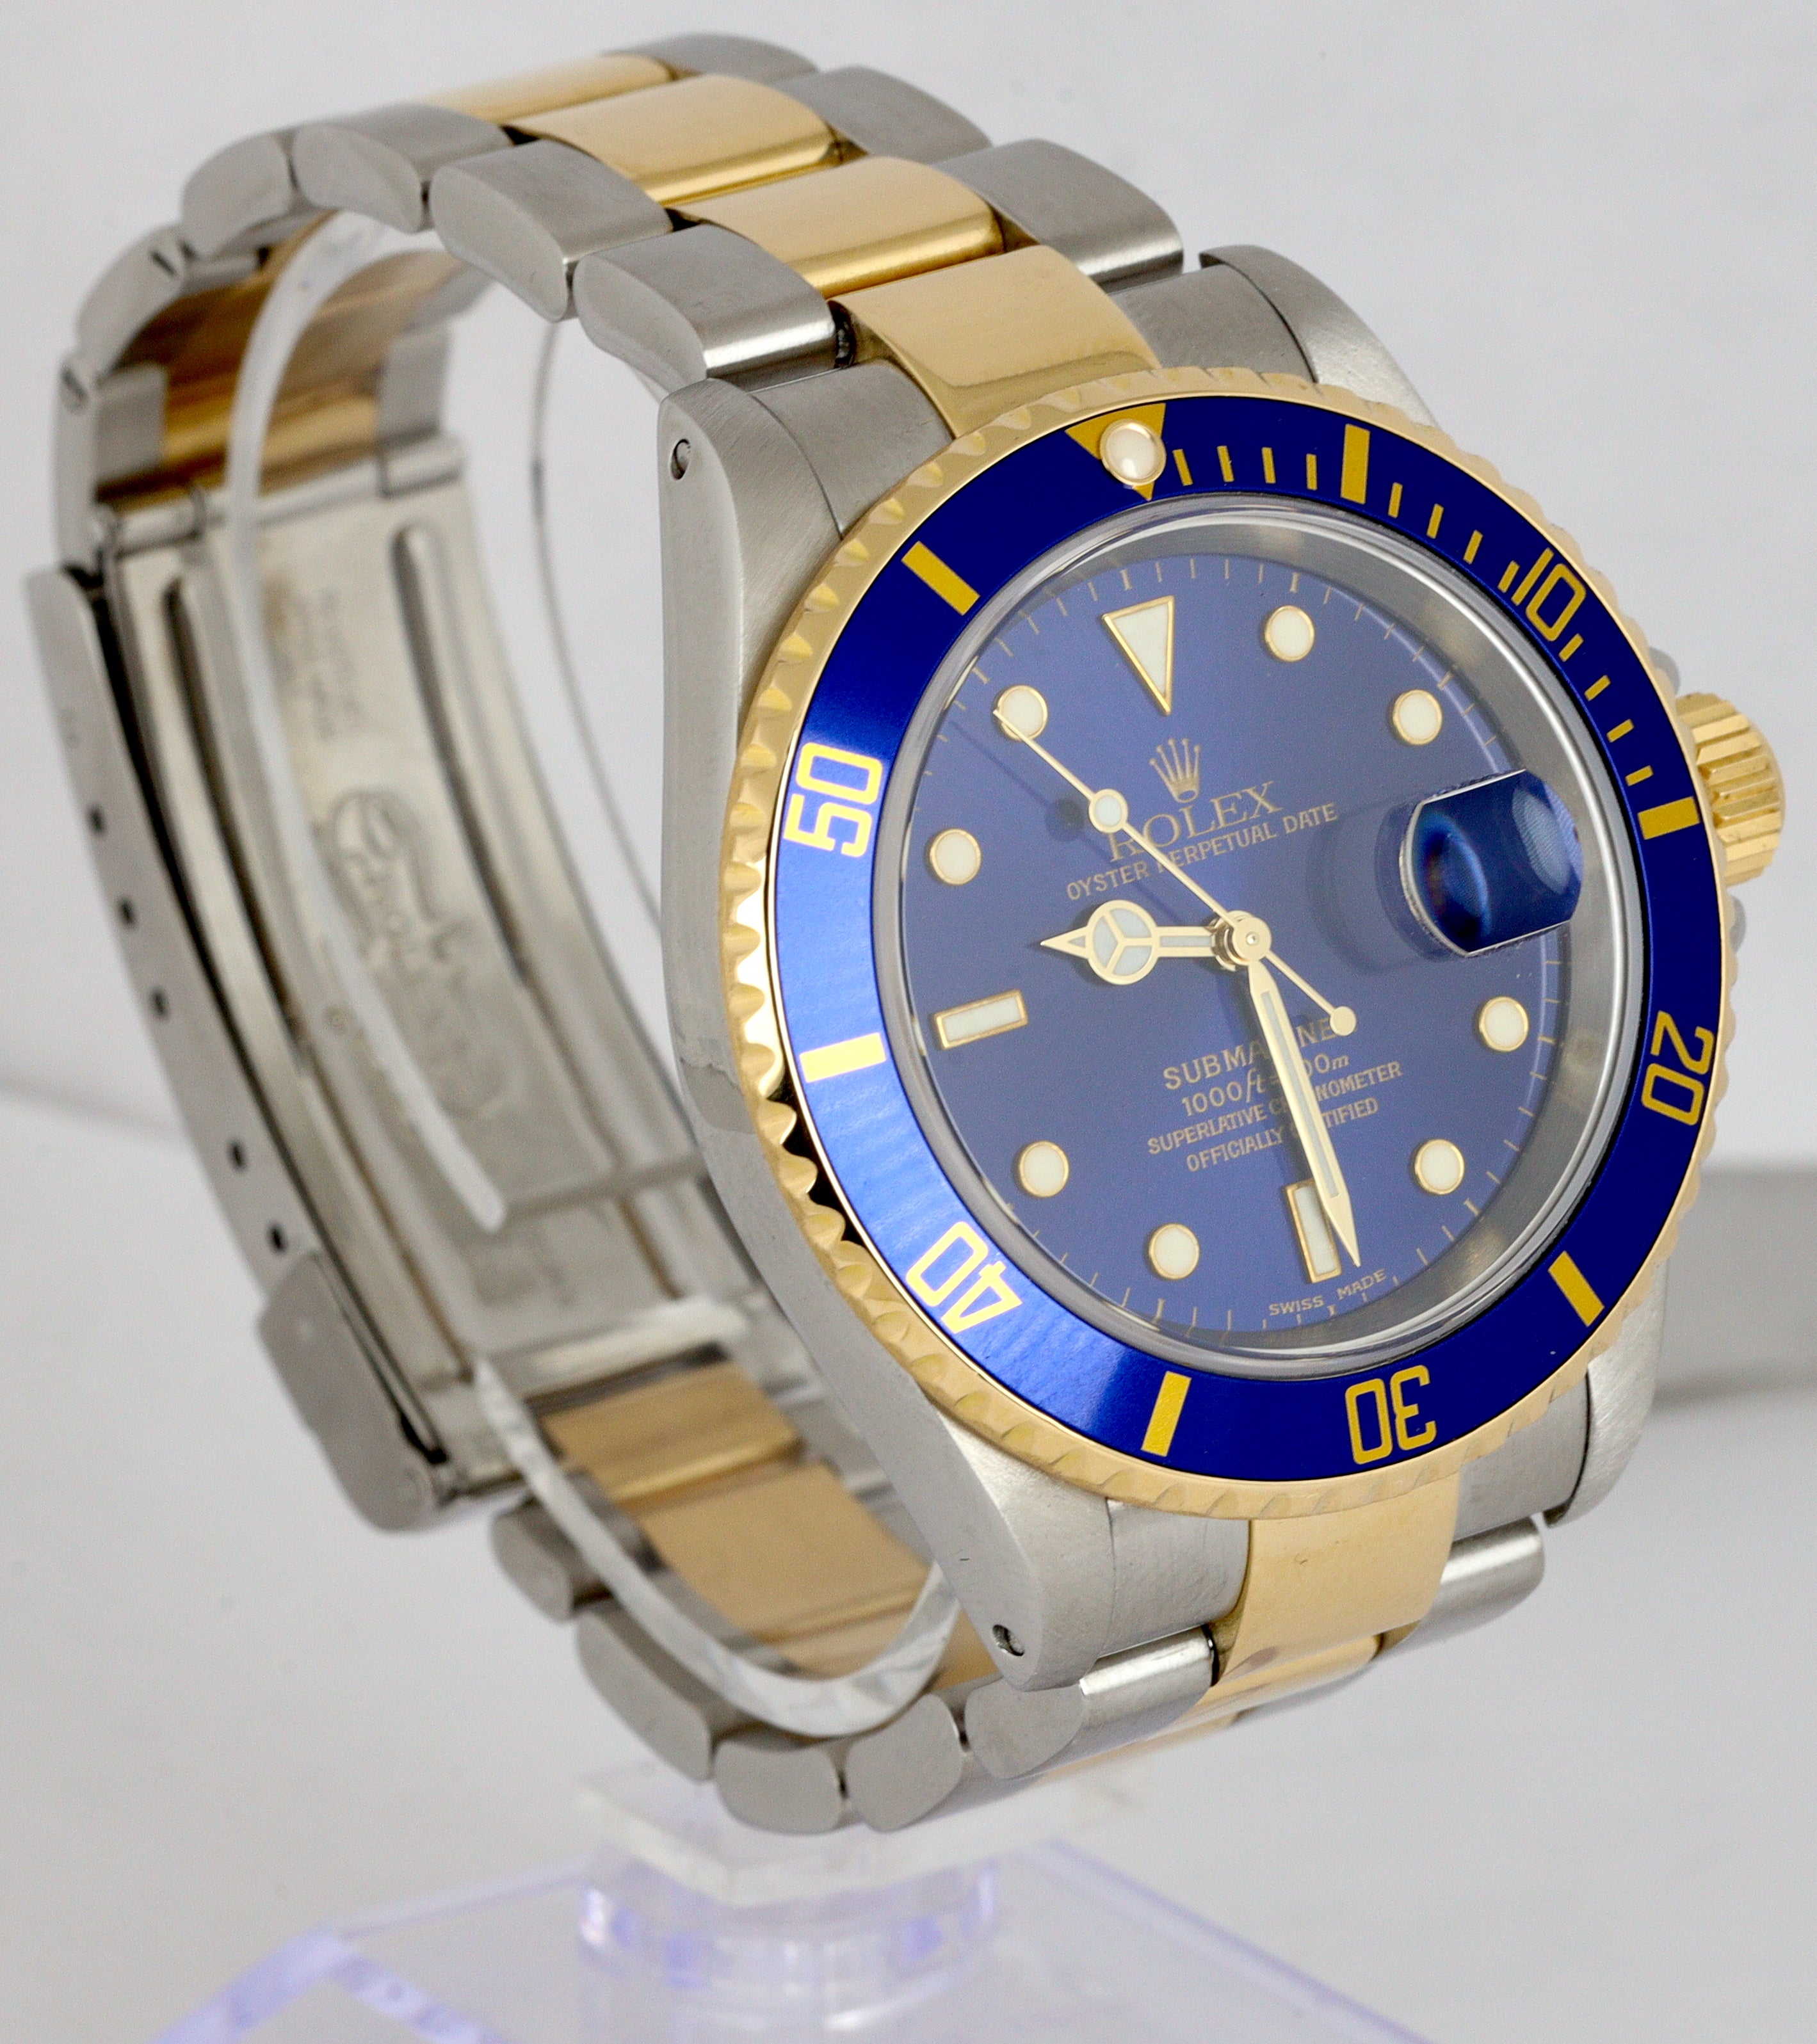 2021 ROLEX SERVICE RSC Submariner Date Blue 16613 Two-Tone 18K Gold SEL 2000